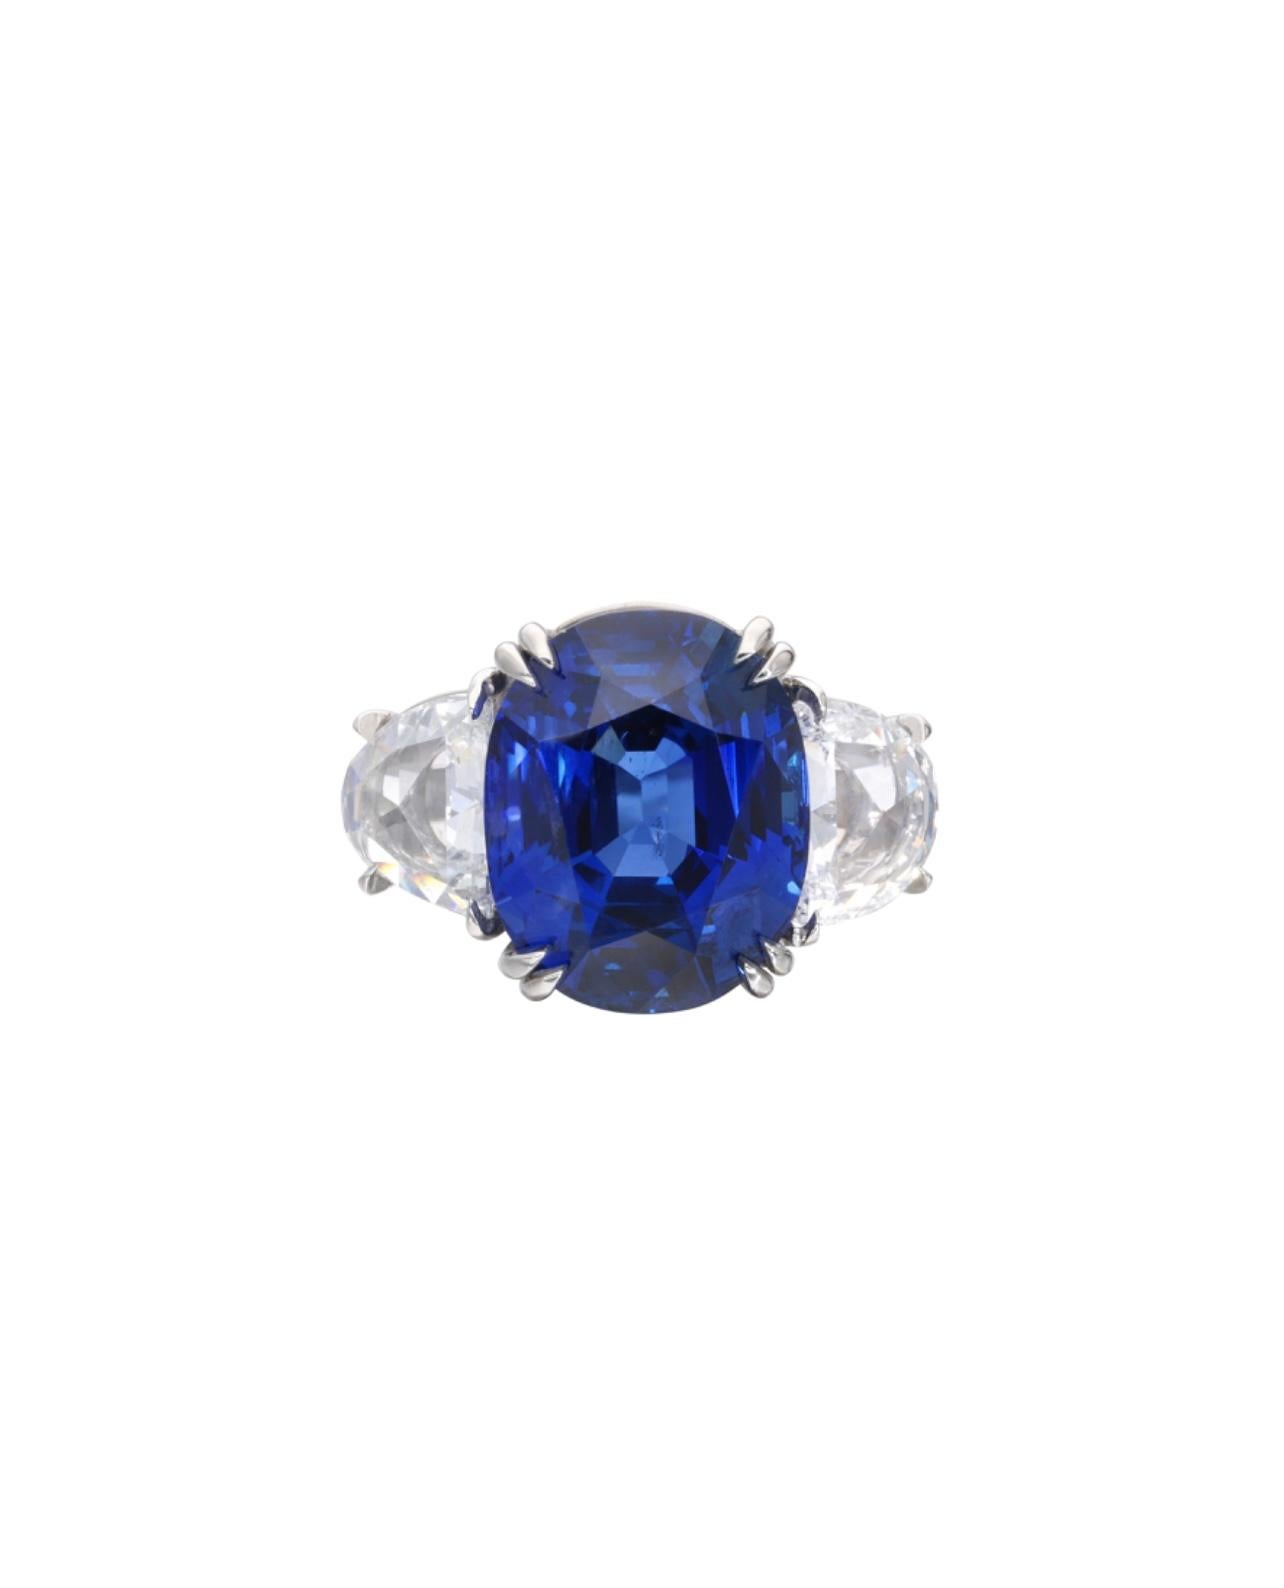 Regal and royal blue wonder. This truly gorgeous Gubelin certified 12.91 carat Burma no heat blue sapphire and diamond engagement ring is beautifully handmade in platinum. 
The details are as follows : 

Blue sapphire weight : 12.91 carat